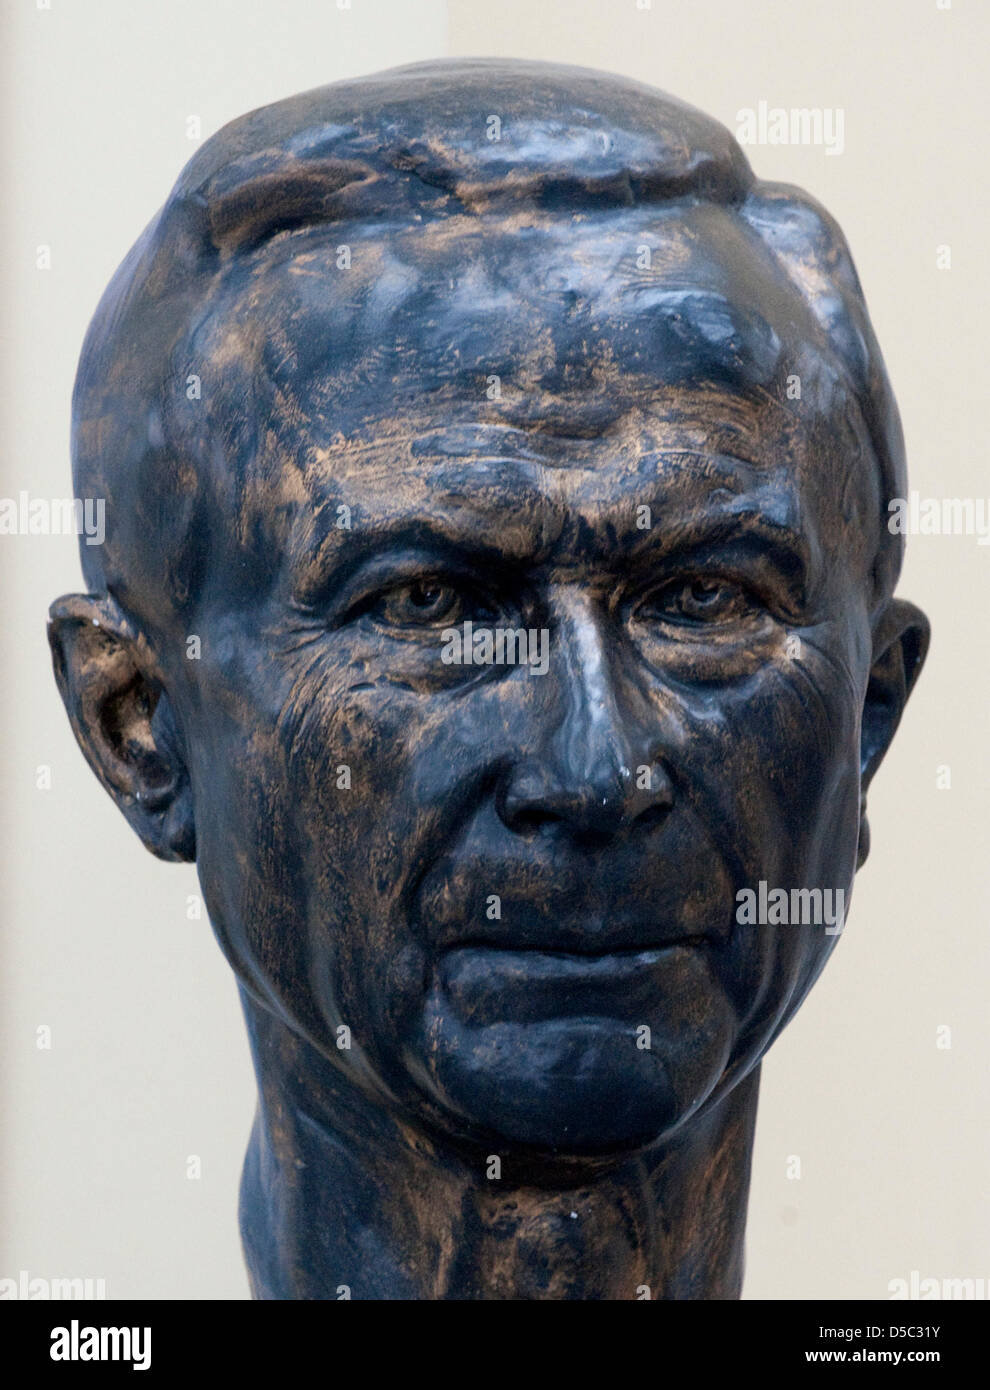 FILE - The file photo dated 18 January 2010 shows a bust of Hugo Junkers, a German avaition pioneer (1859-1935) on display at the 'Technikmuseum Hugo Junkers' in Dessau, Germany. Hugo Junkers, one of the most important air craft designers of his time, died 75 years ago. Among other planes, he designed the landmark F13 (in1919), the world's first airplane solely made of steel. Photo Stock Photo